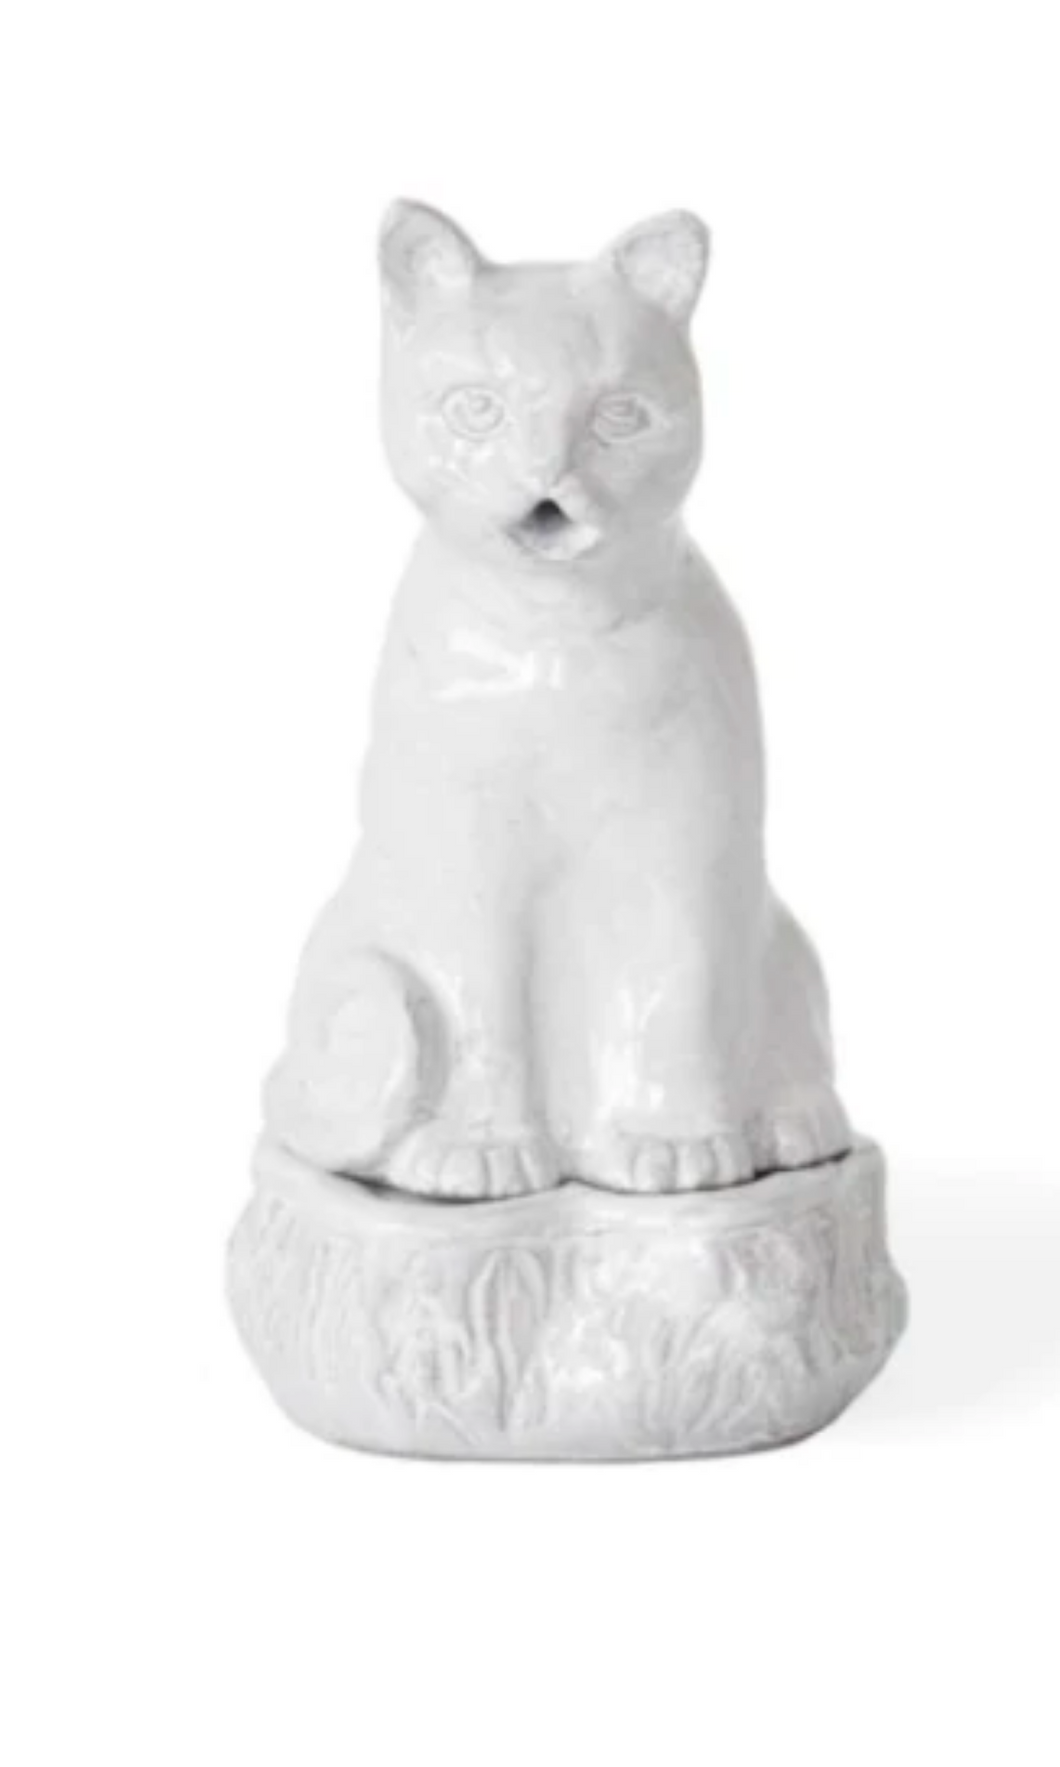 Astier de Villatte Setsuko Cat ceramic incense holder handmade in Paris using black clay and dipped in white glaze, available at Amara Home.